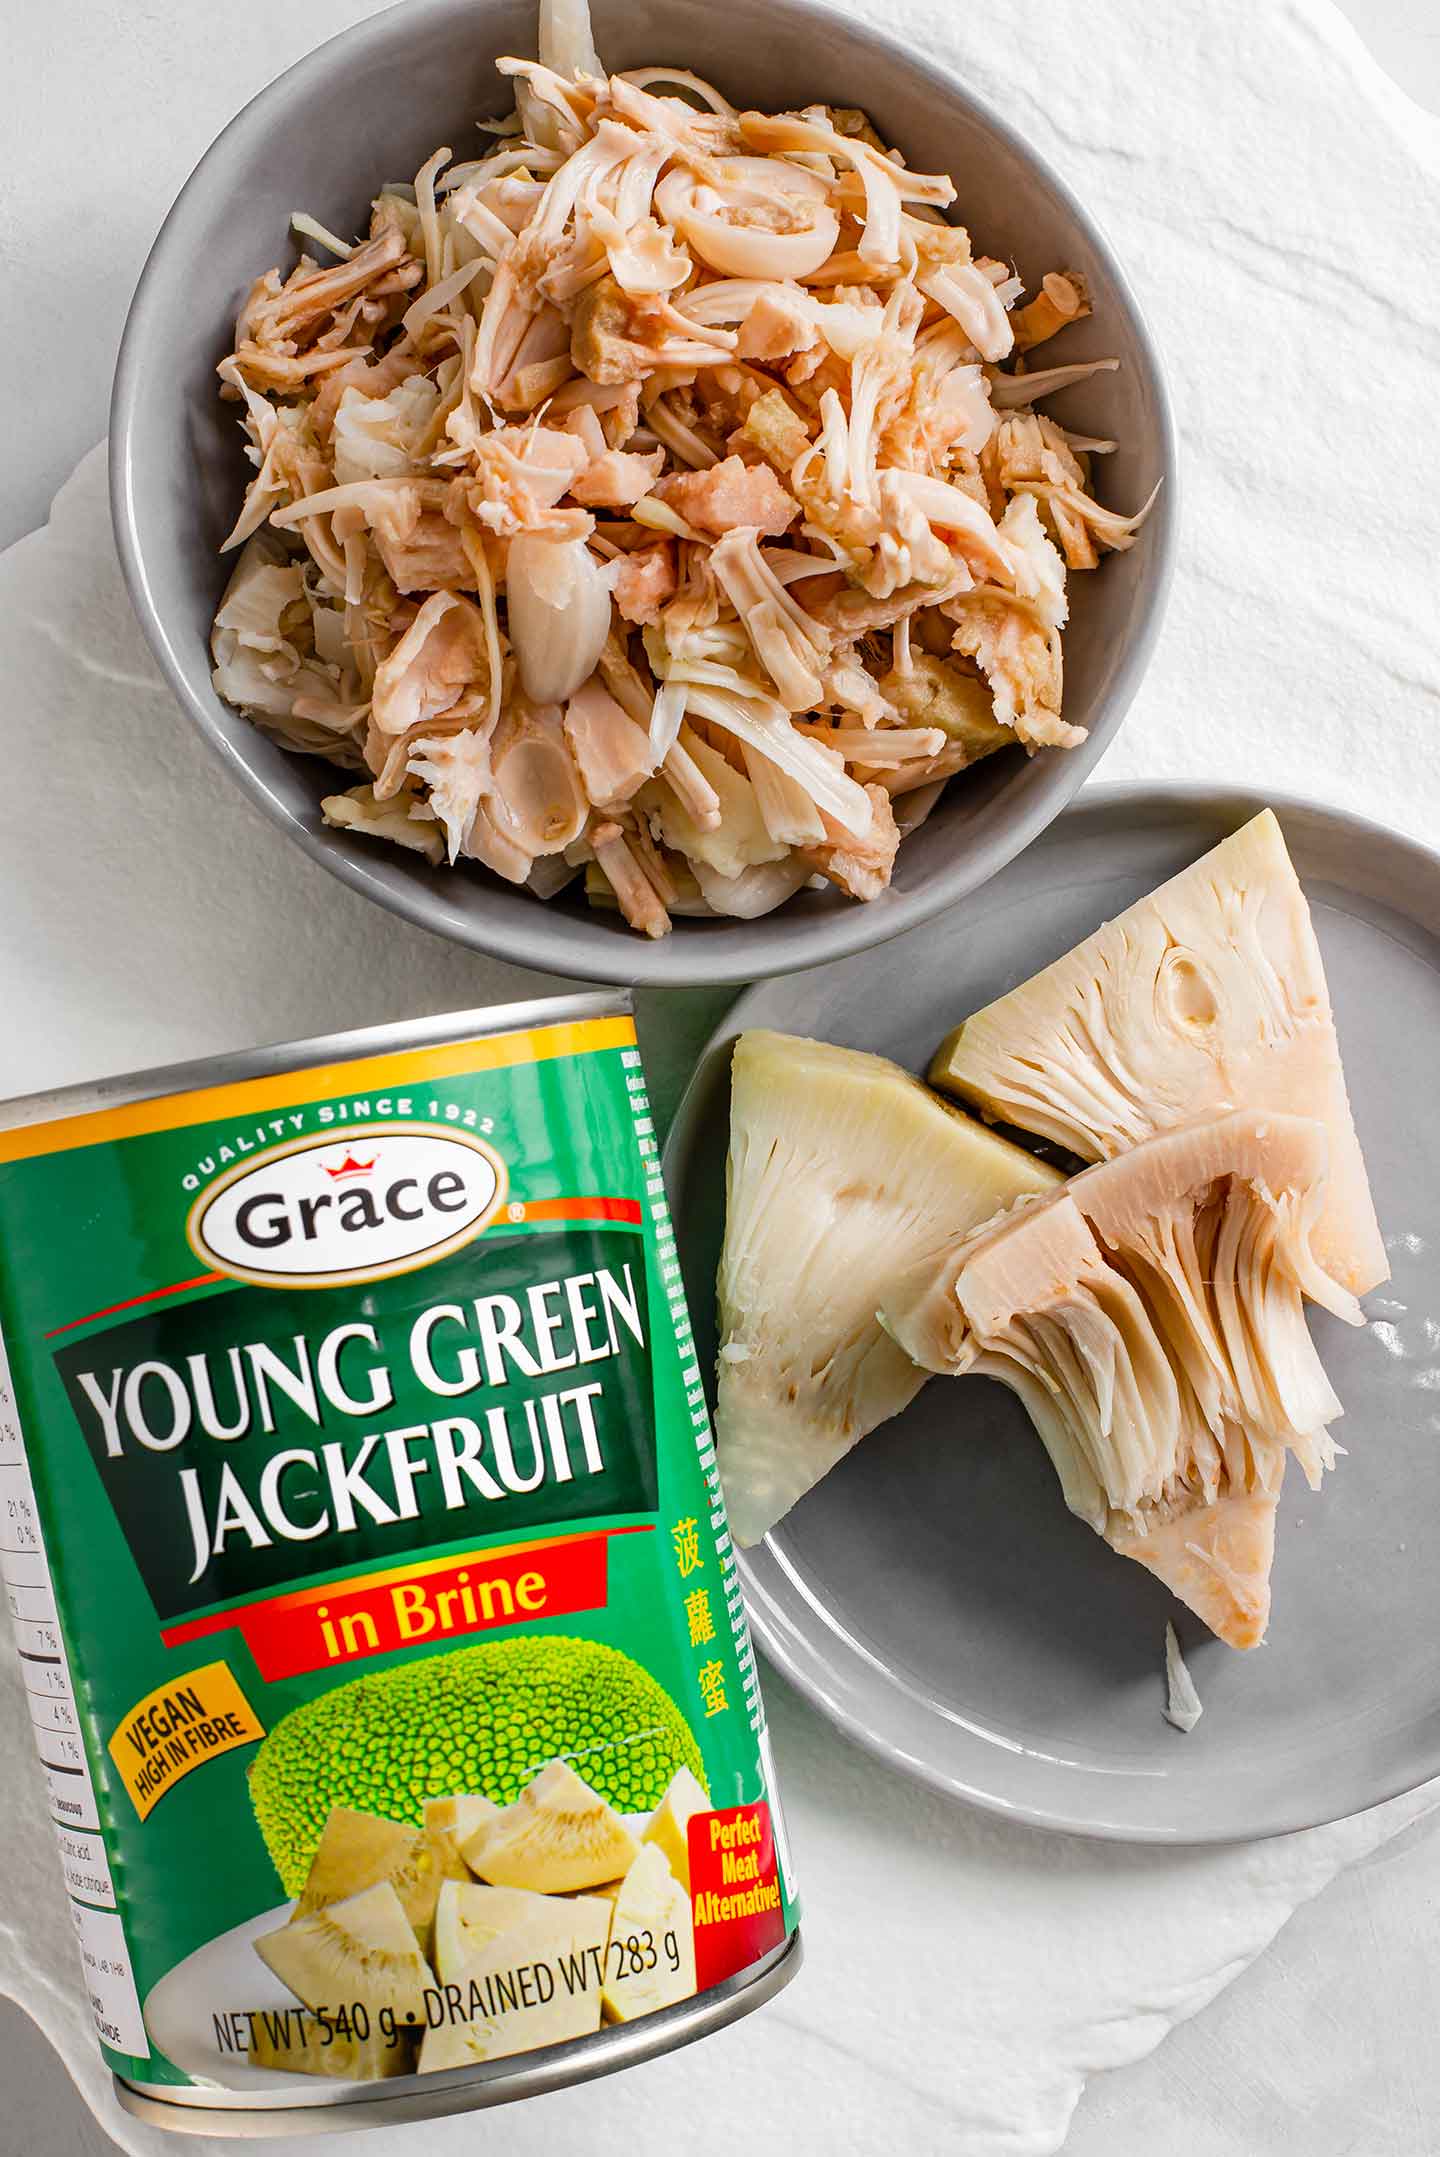 Top down view of canned young green jackfruit. Three full pieces of young jackfruit are shown on a plate and another dish holds pulled jackfruit.